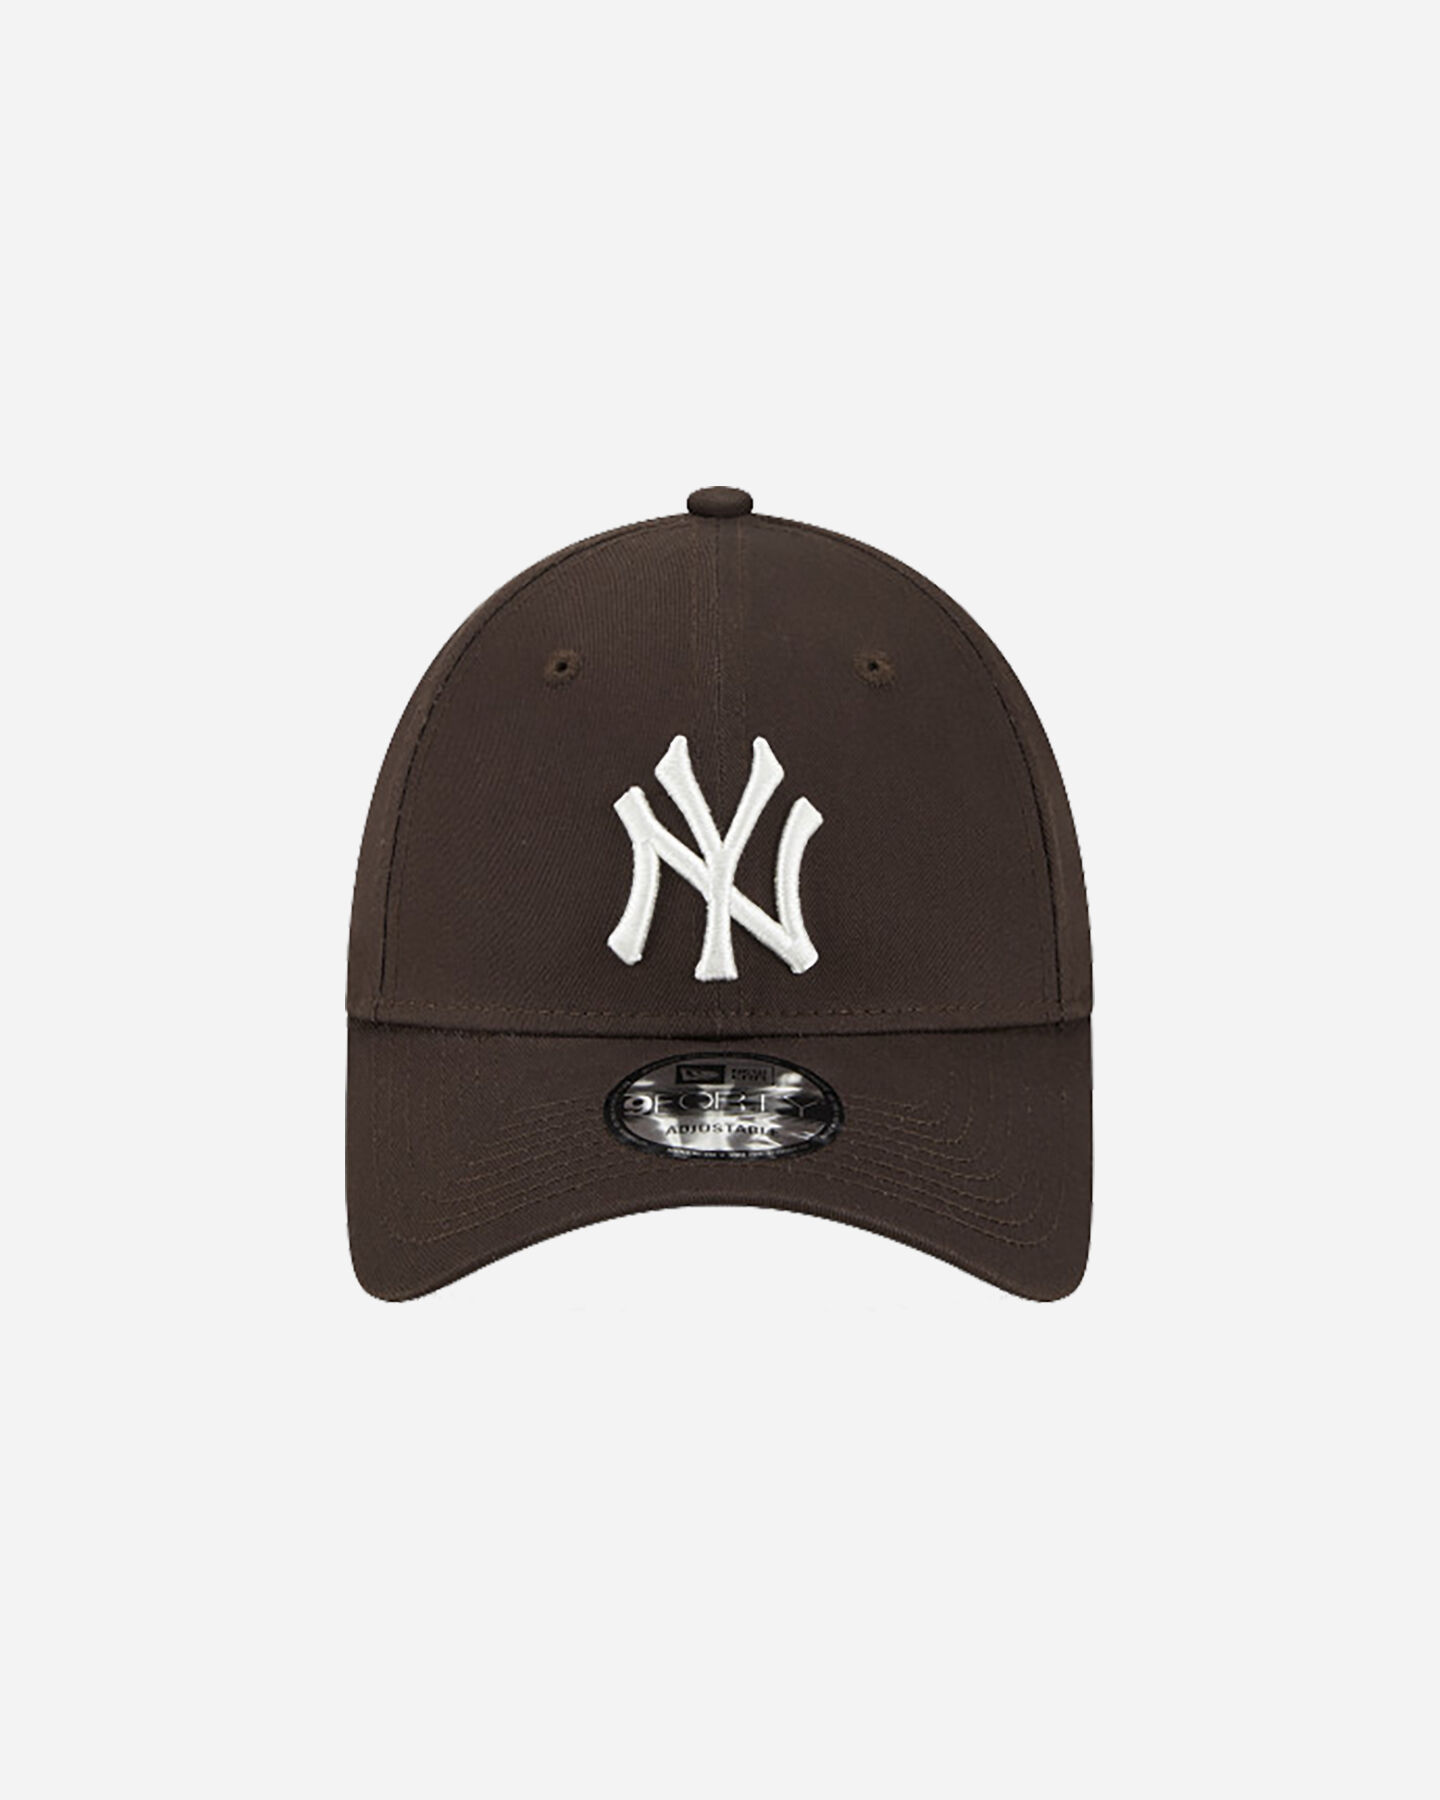  Cappellino NEW ERA 9FORTY MLB LEAGUE NEW YORK YANKEES  S5630960|201|OSFM scatto 1